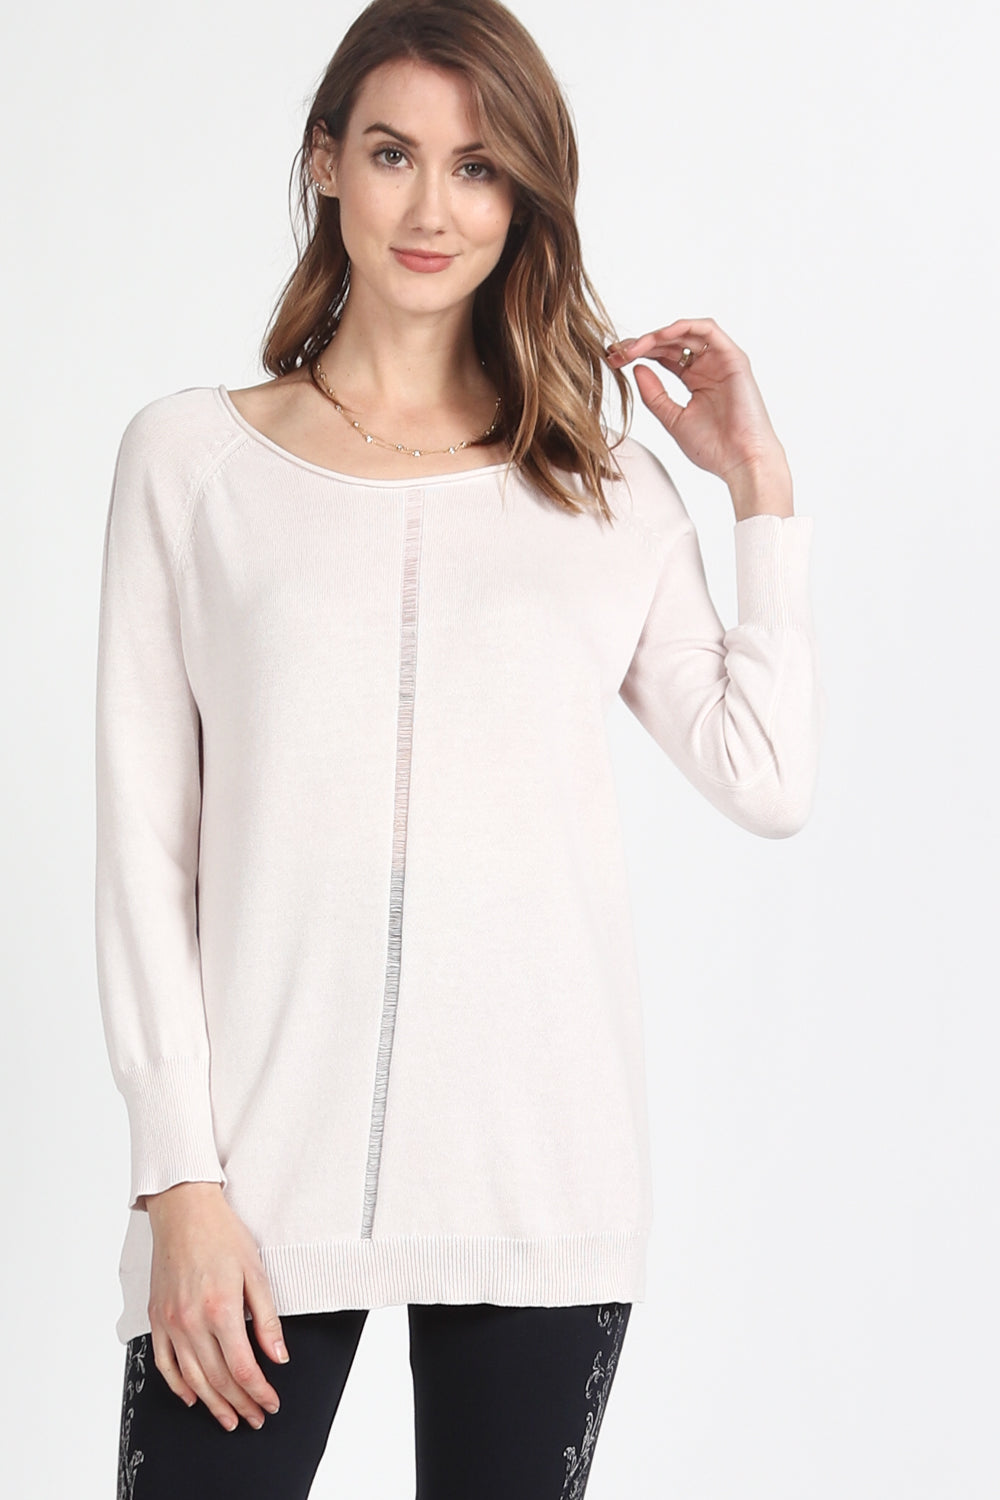 Lucia Mineral Wash Knit